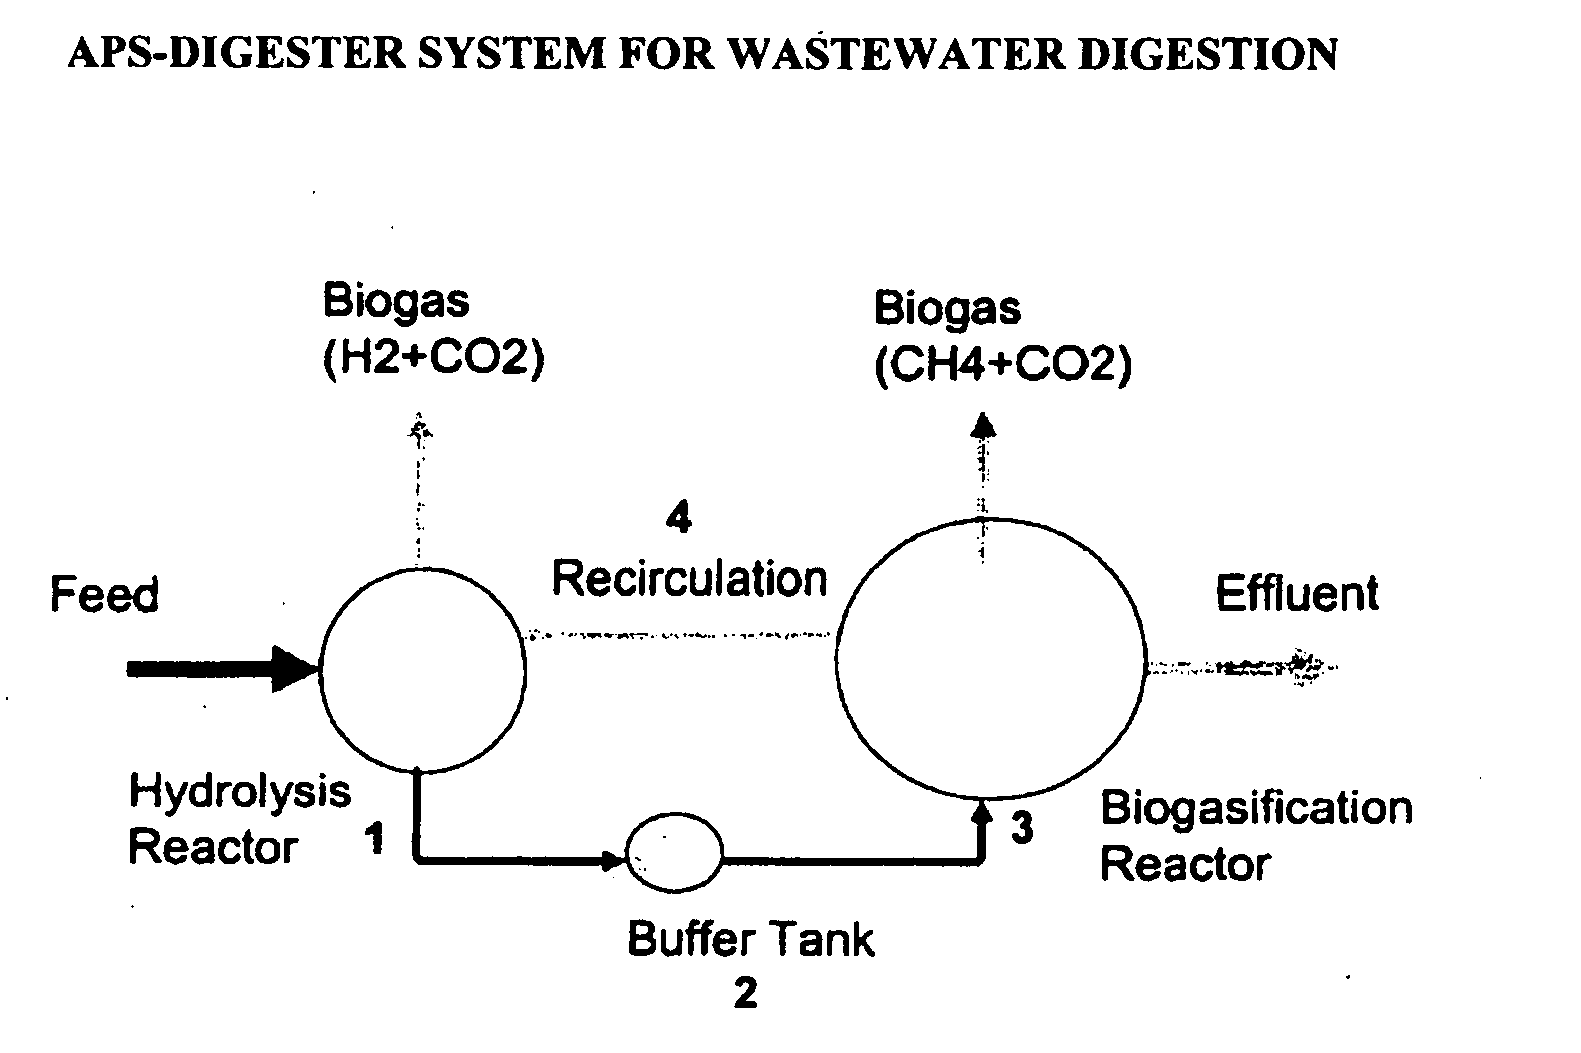 Anaerobic phased solids digester for biogas production from organic solid wastes